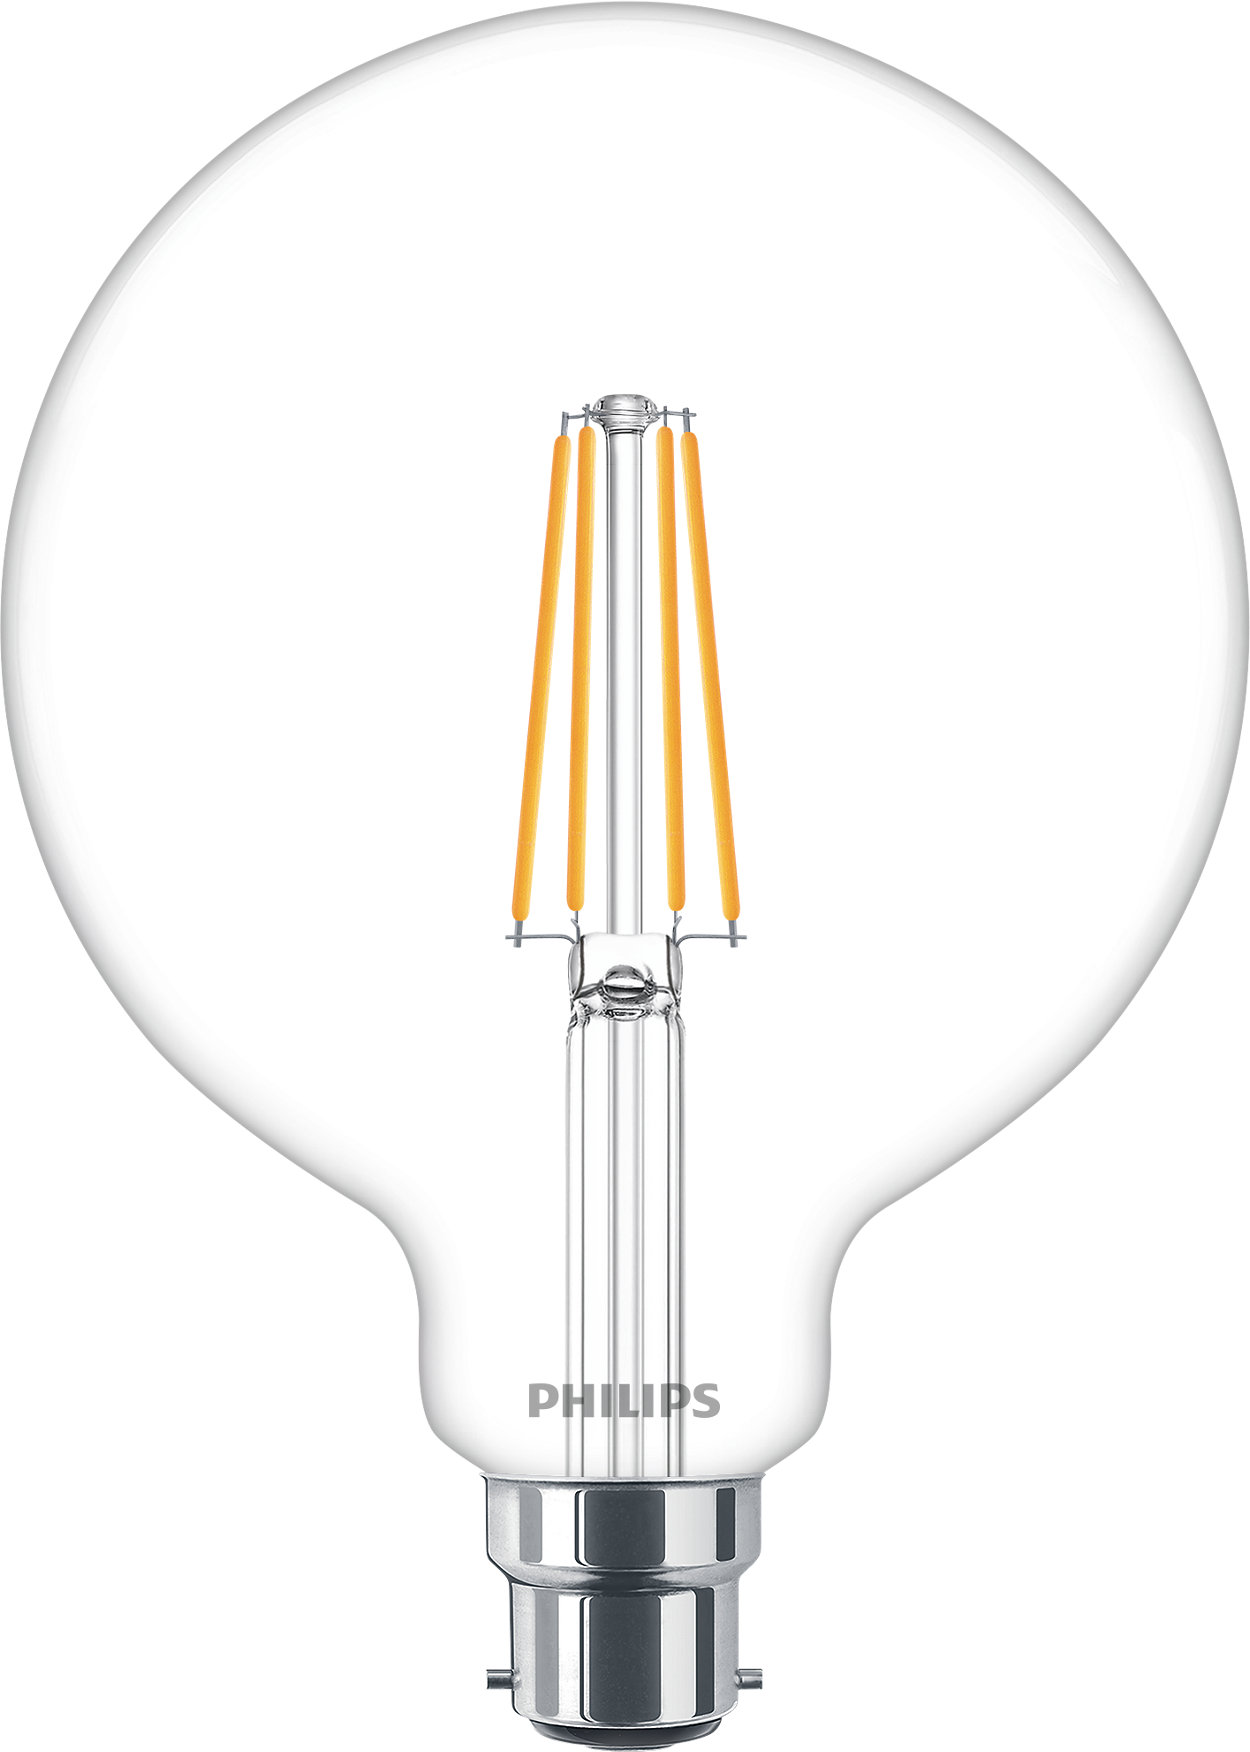 Experience dimmable, warm white LED light